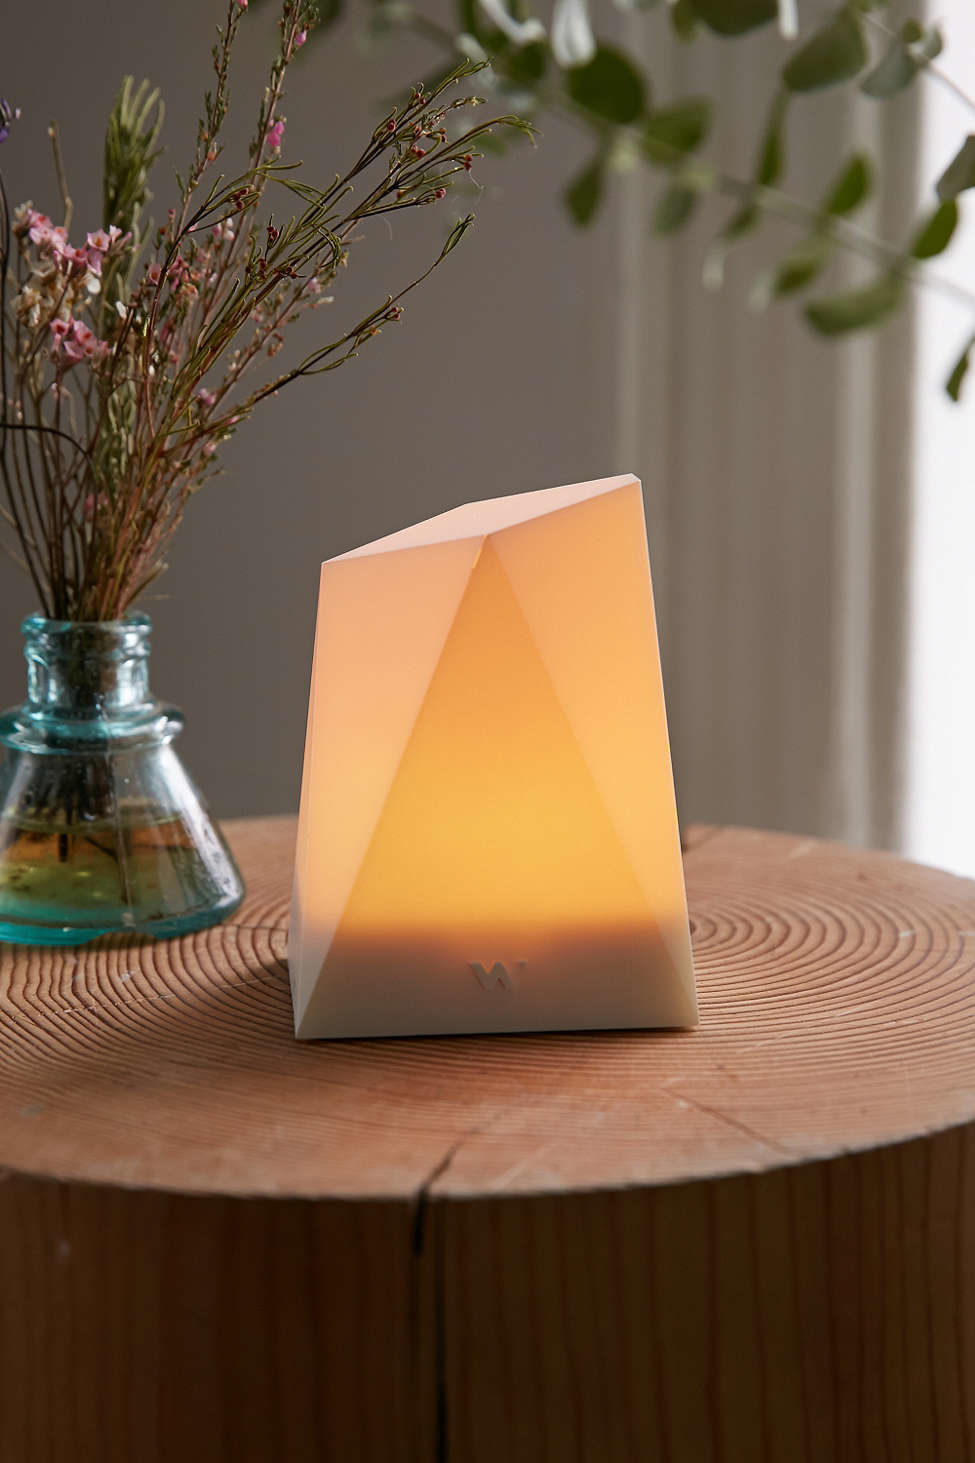 This cool light lets you know when you have an important message or call so you can put your phone away.